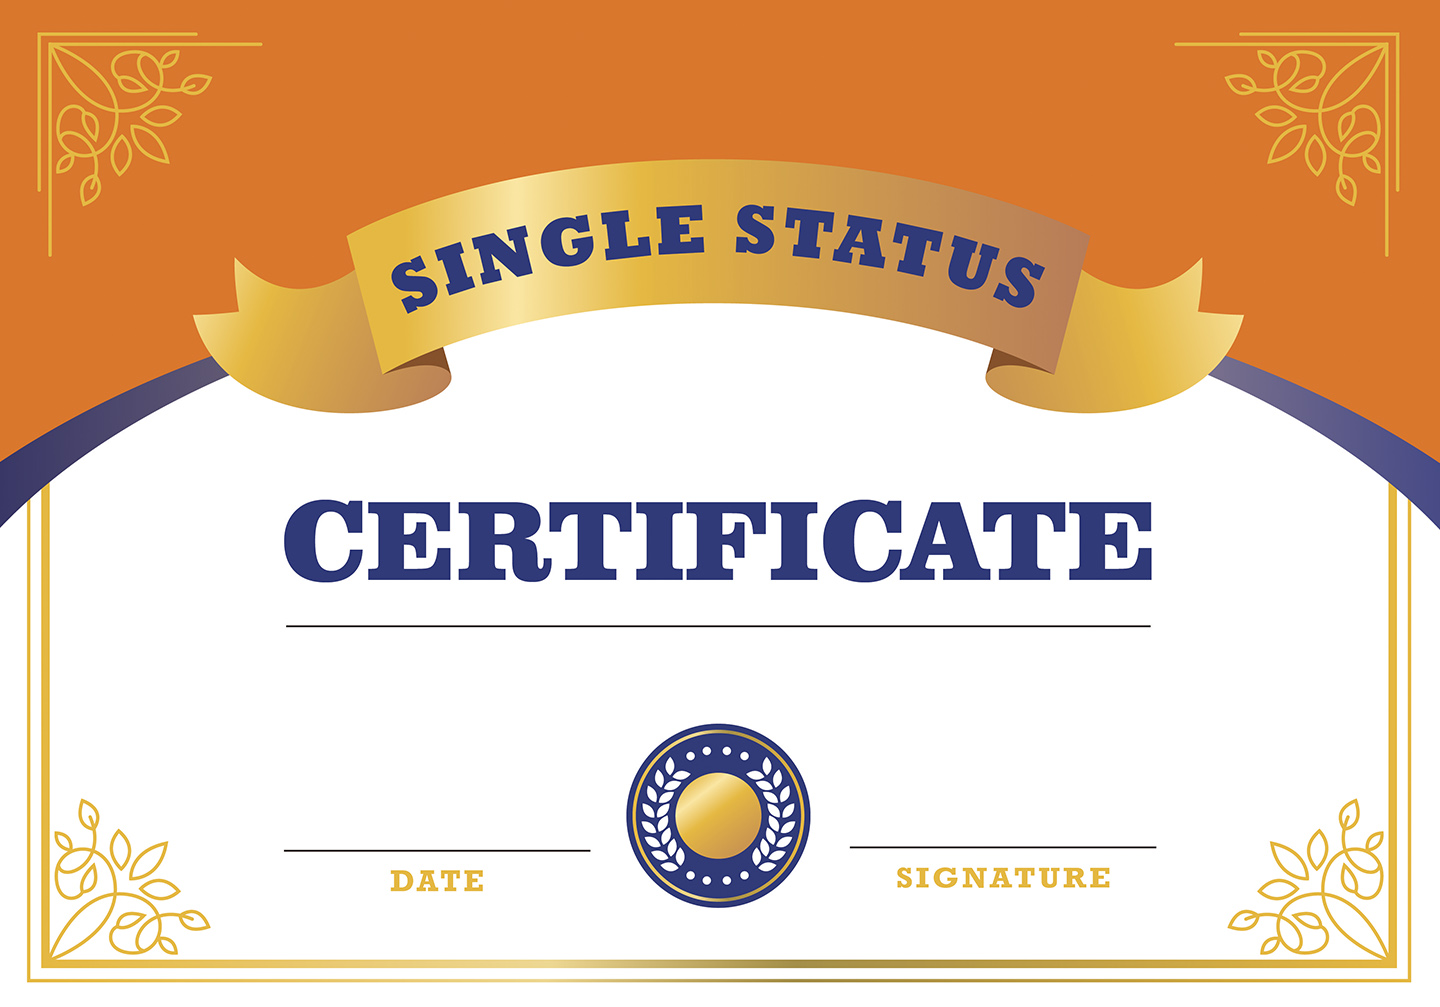 How Can You Get a Single Status Certificate